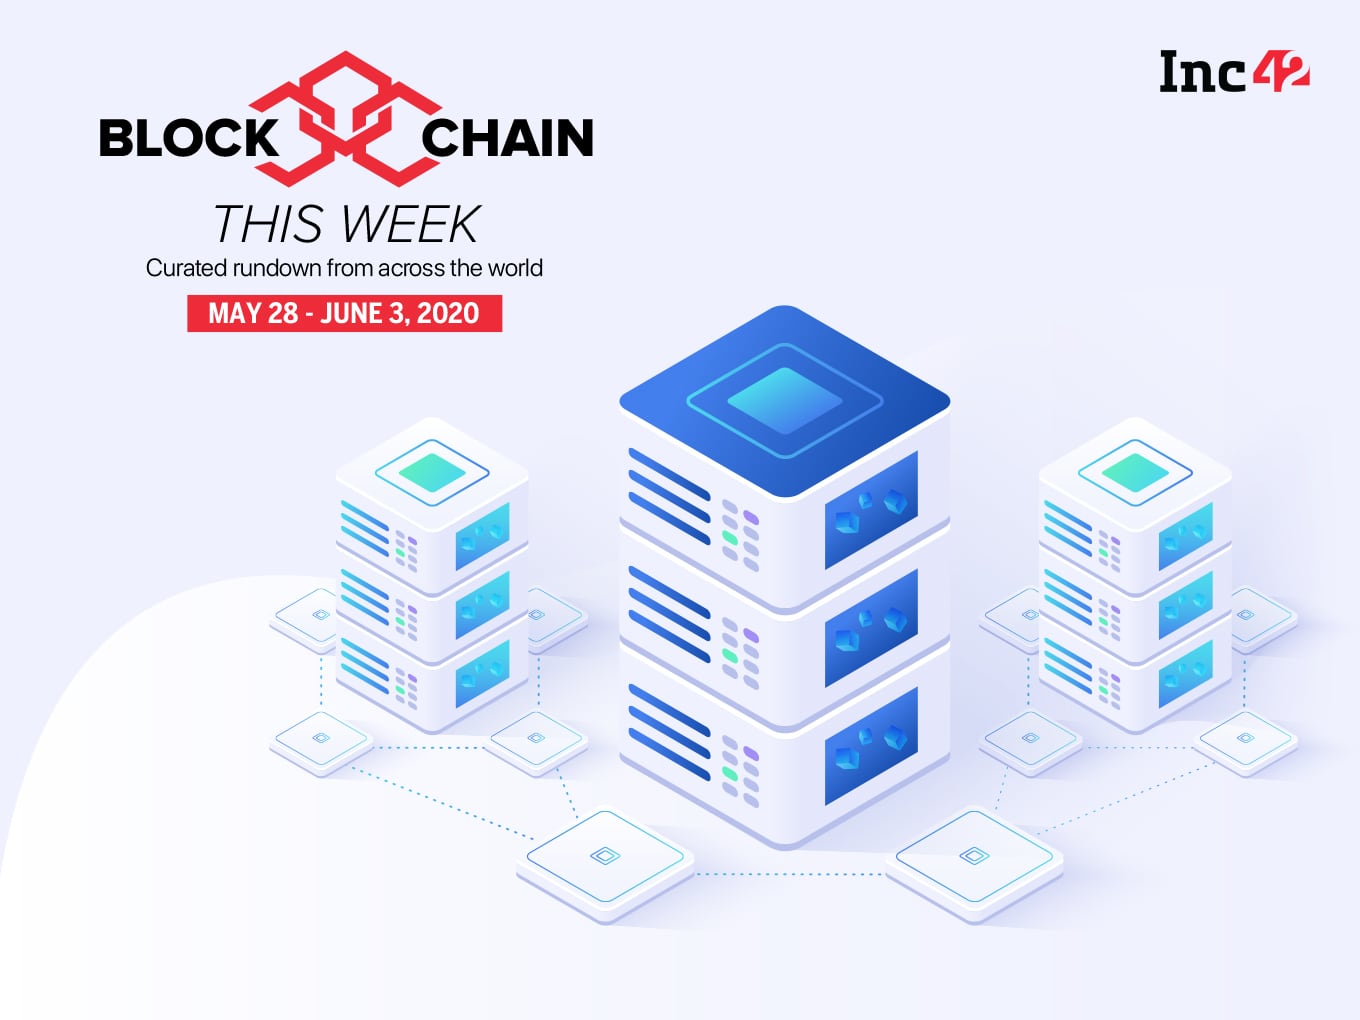 Blockchain This Week: Tech Mahindra, Idealabs Launches Blockchain Courses, Ant Group Offers SMEs Blockchain Tech & More